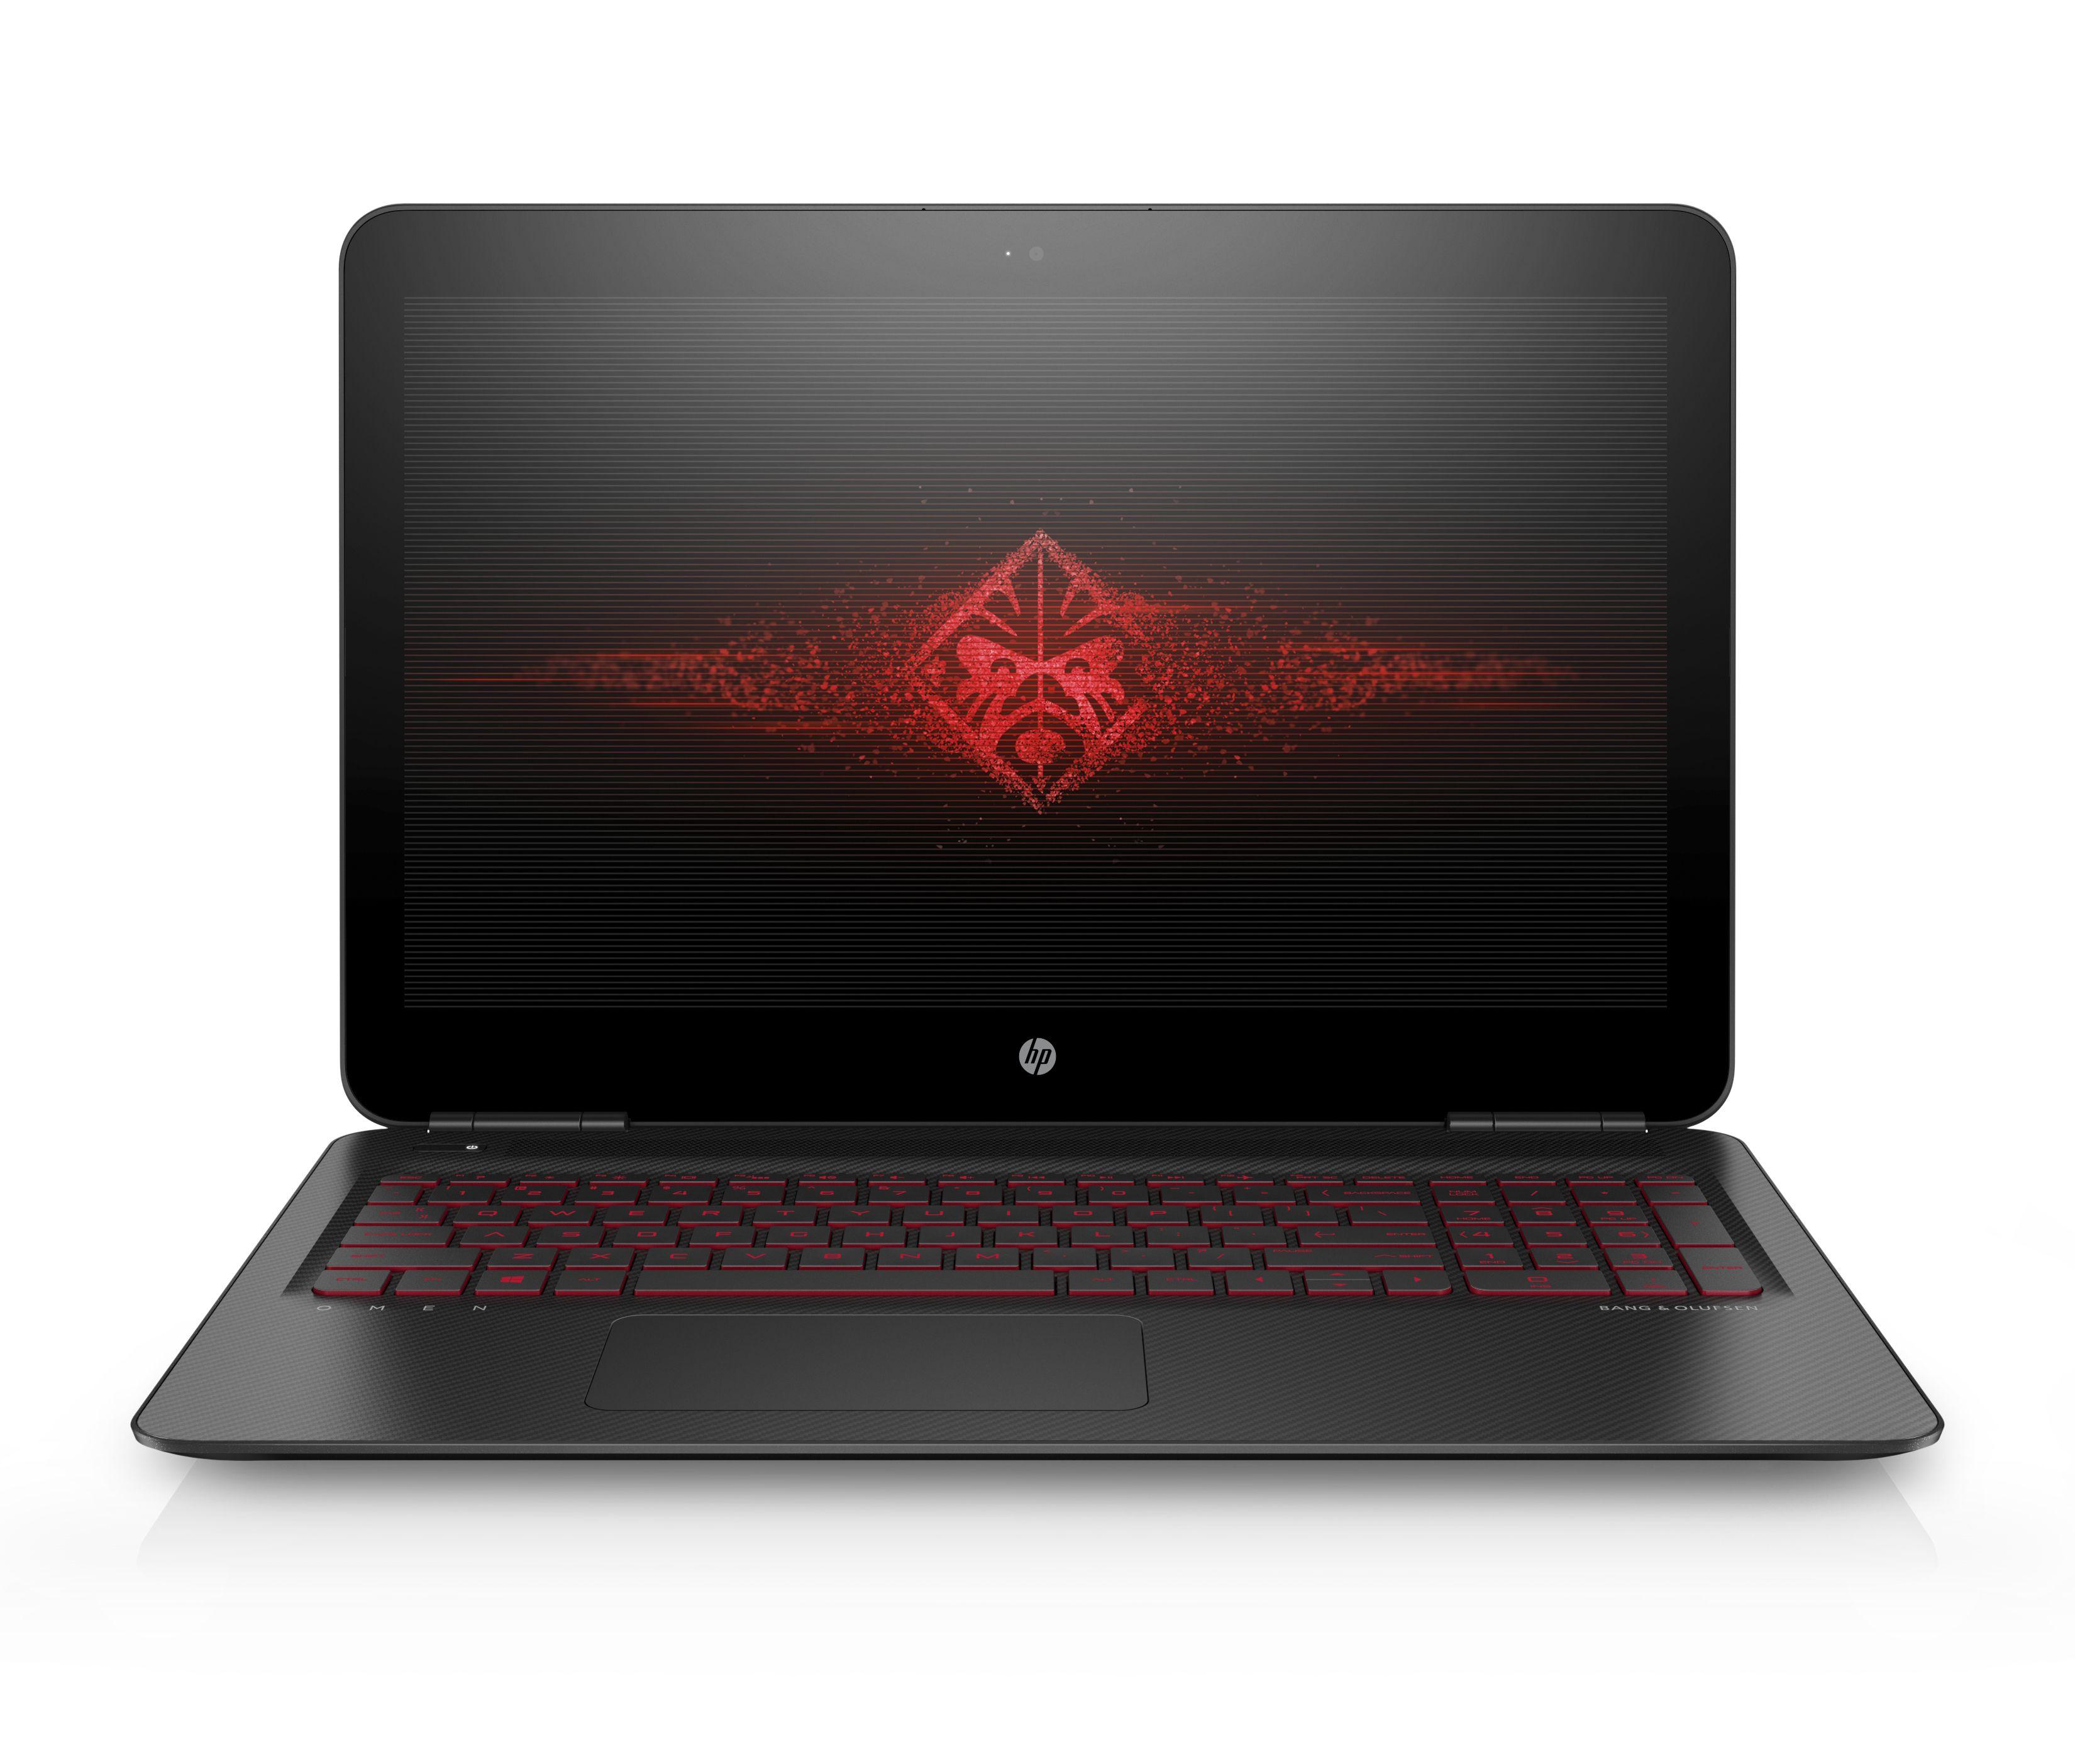 HP PC Logo - HP launches new Omen line of gaming laptops, desktops, and ...